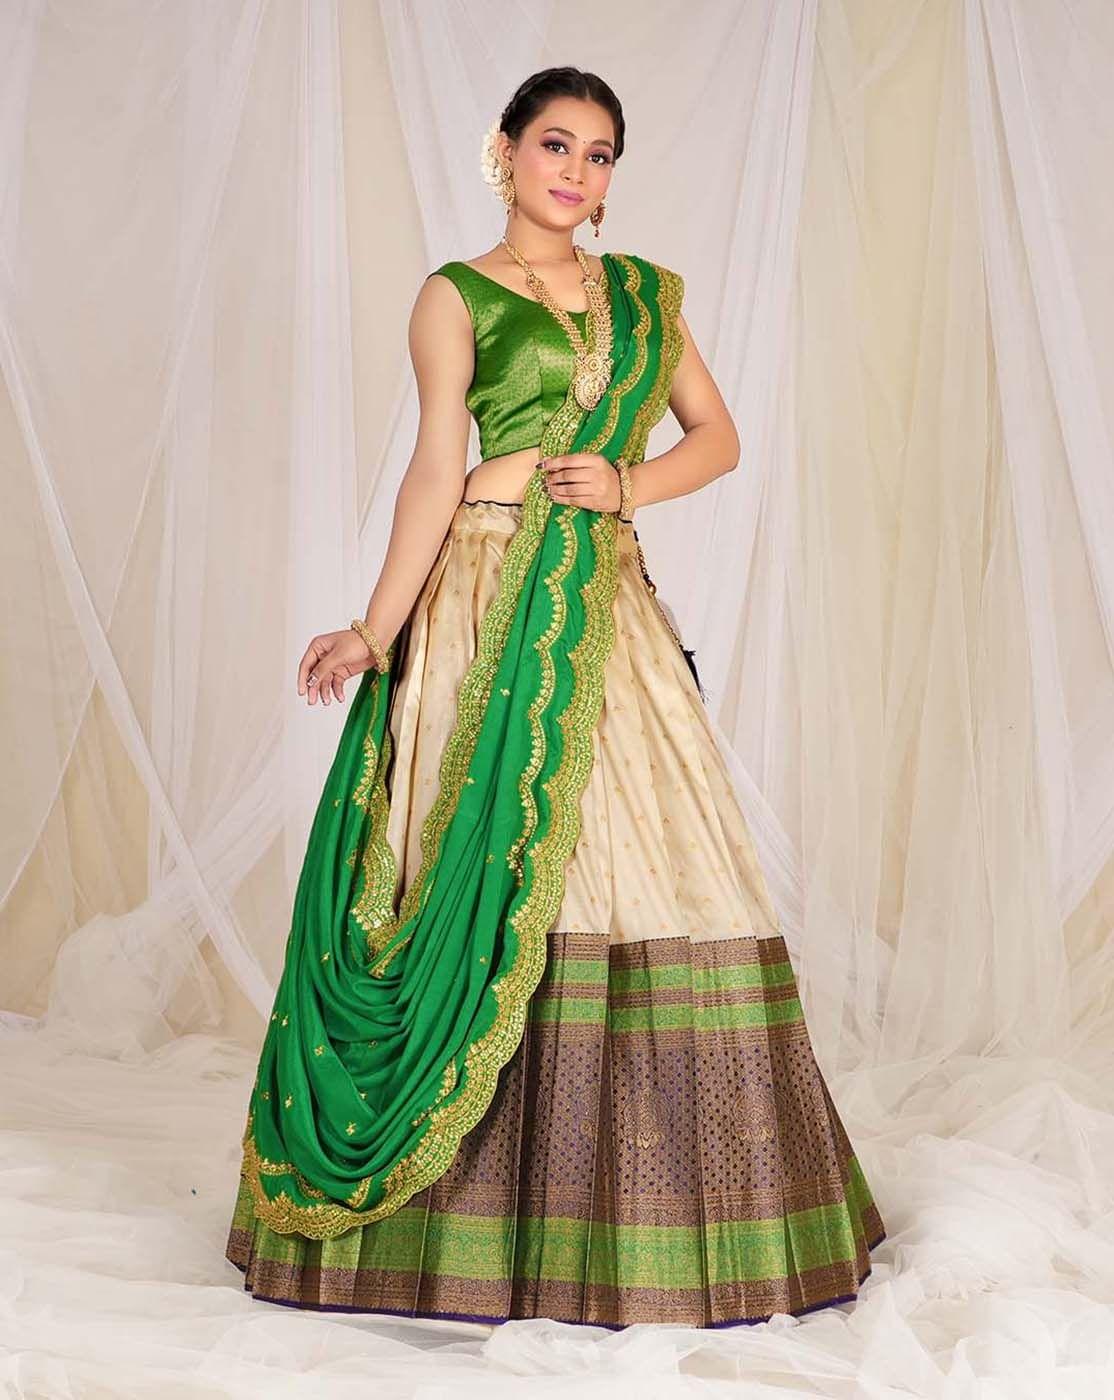 Embroidered Art Silk Jacquard Lehenga in Teal Green and Blue : LYC1800